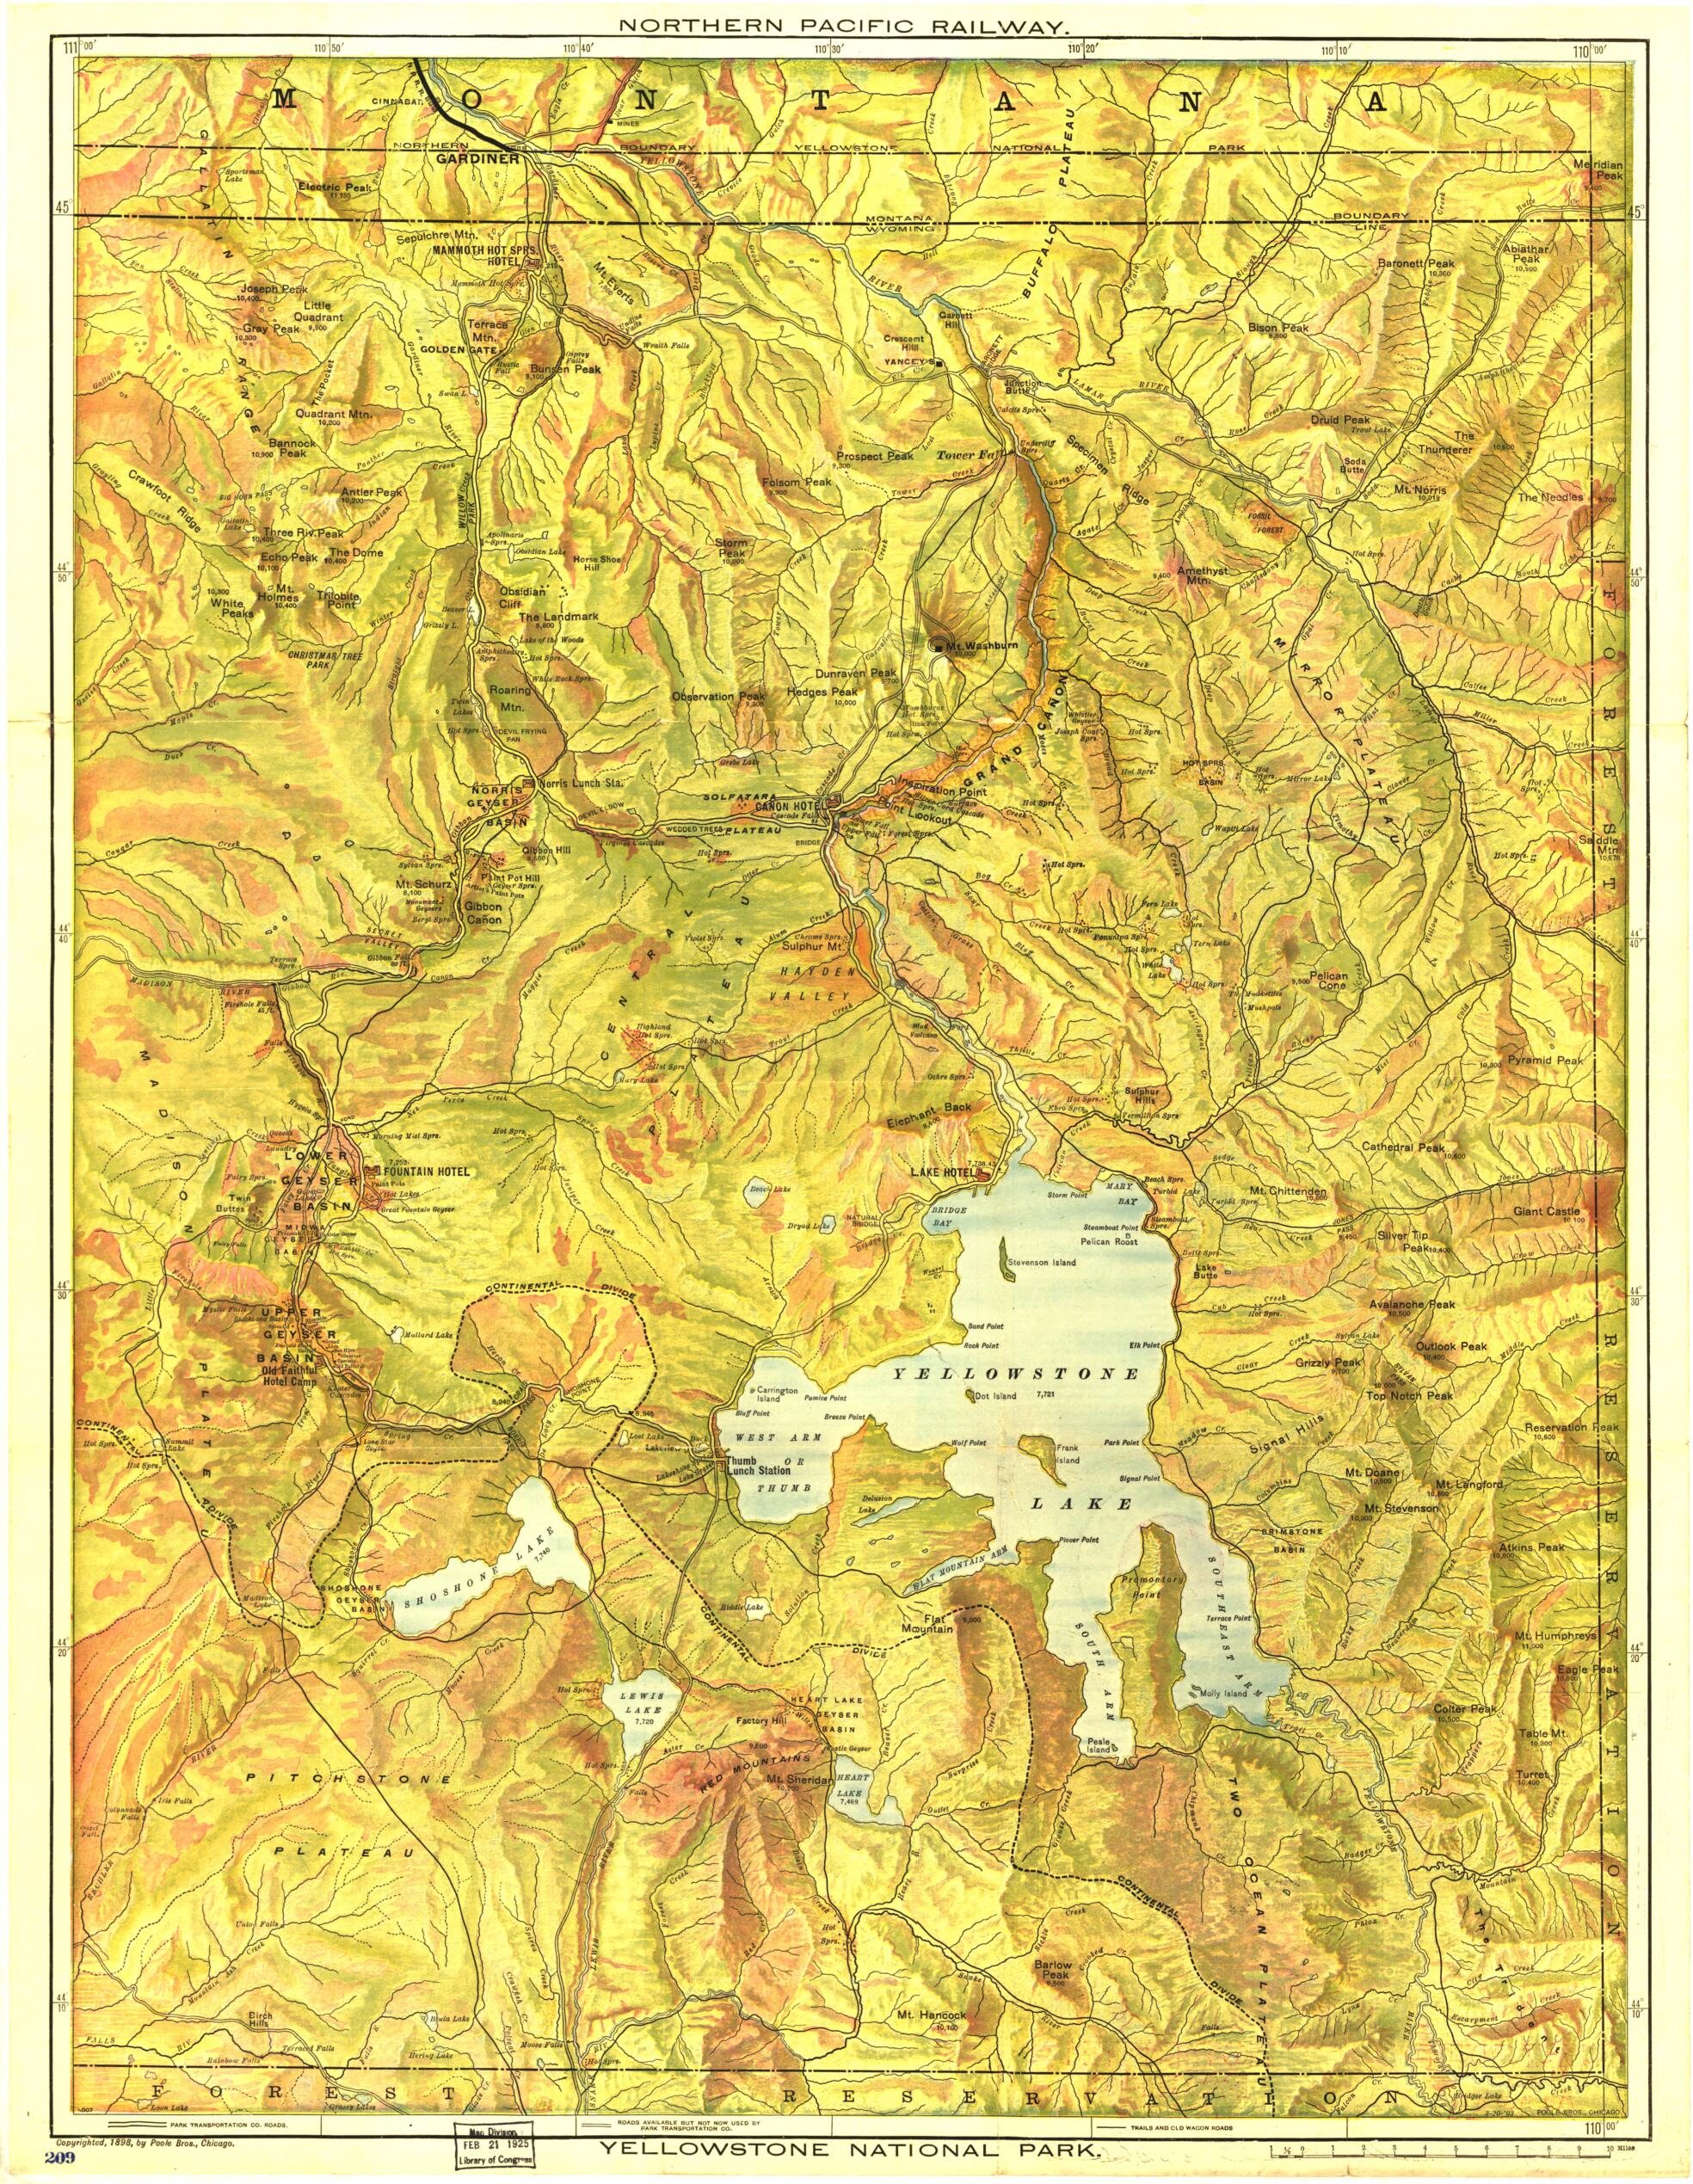 This old map of Yellowstone National Park from 1903 was created by  Northern Pacific Railway Company,  Poole Brothers in 1903